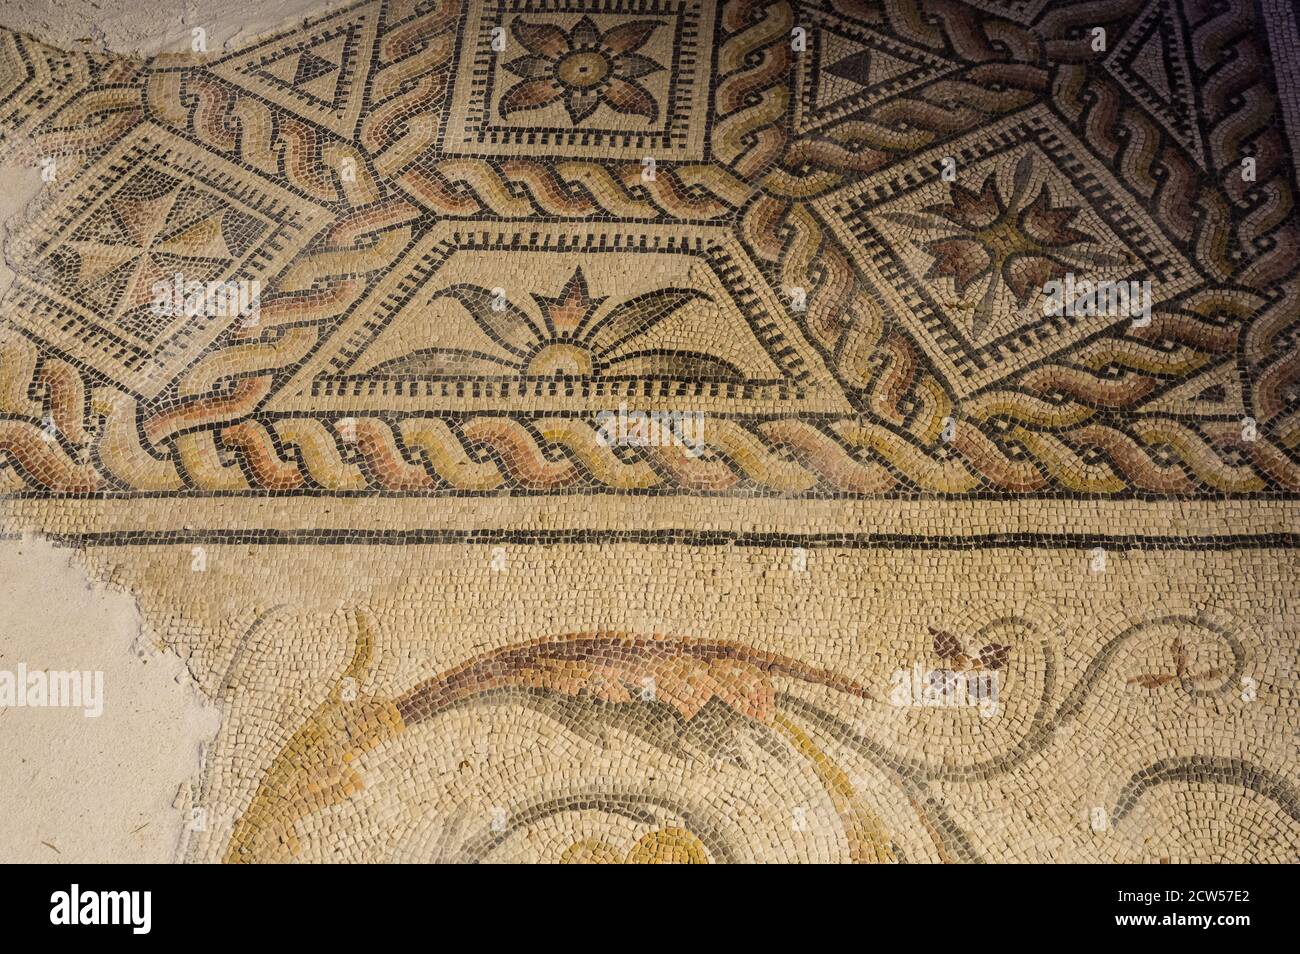 Aquileia (Italy) - A mosaic floor of the rooms of the Domus of Tito Macro, an ancient roman house of the 1st century b.C. Stock Photo